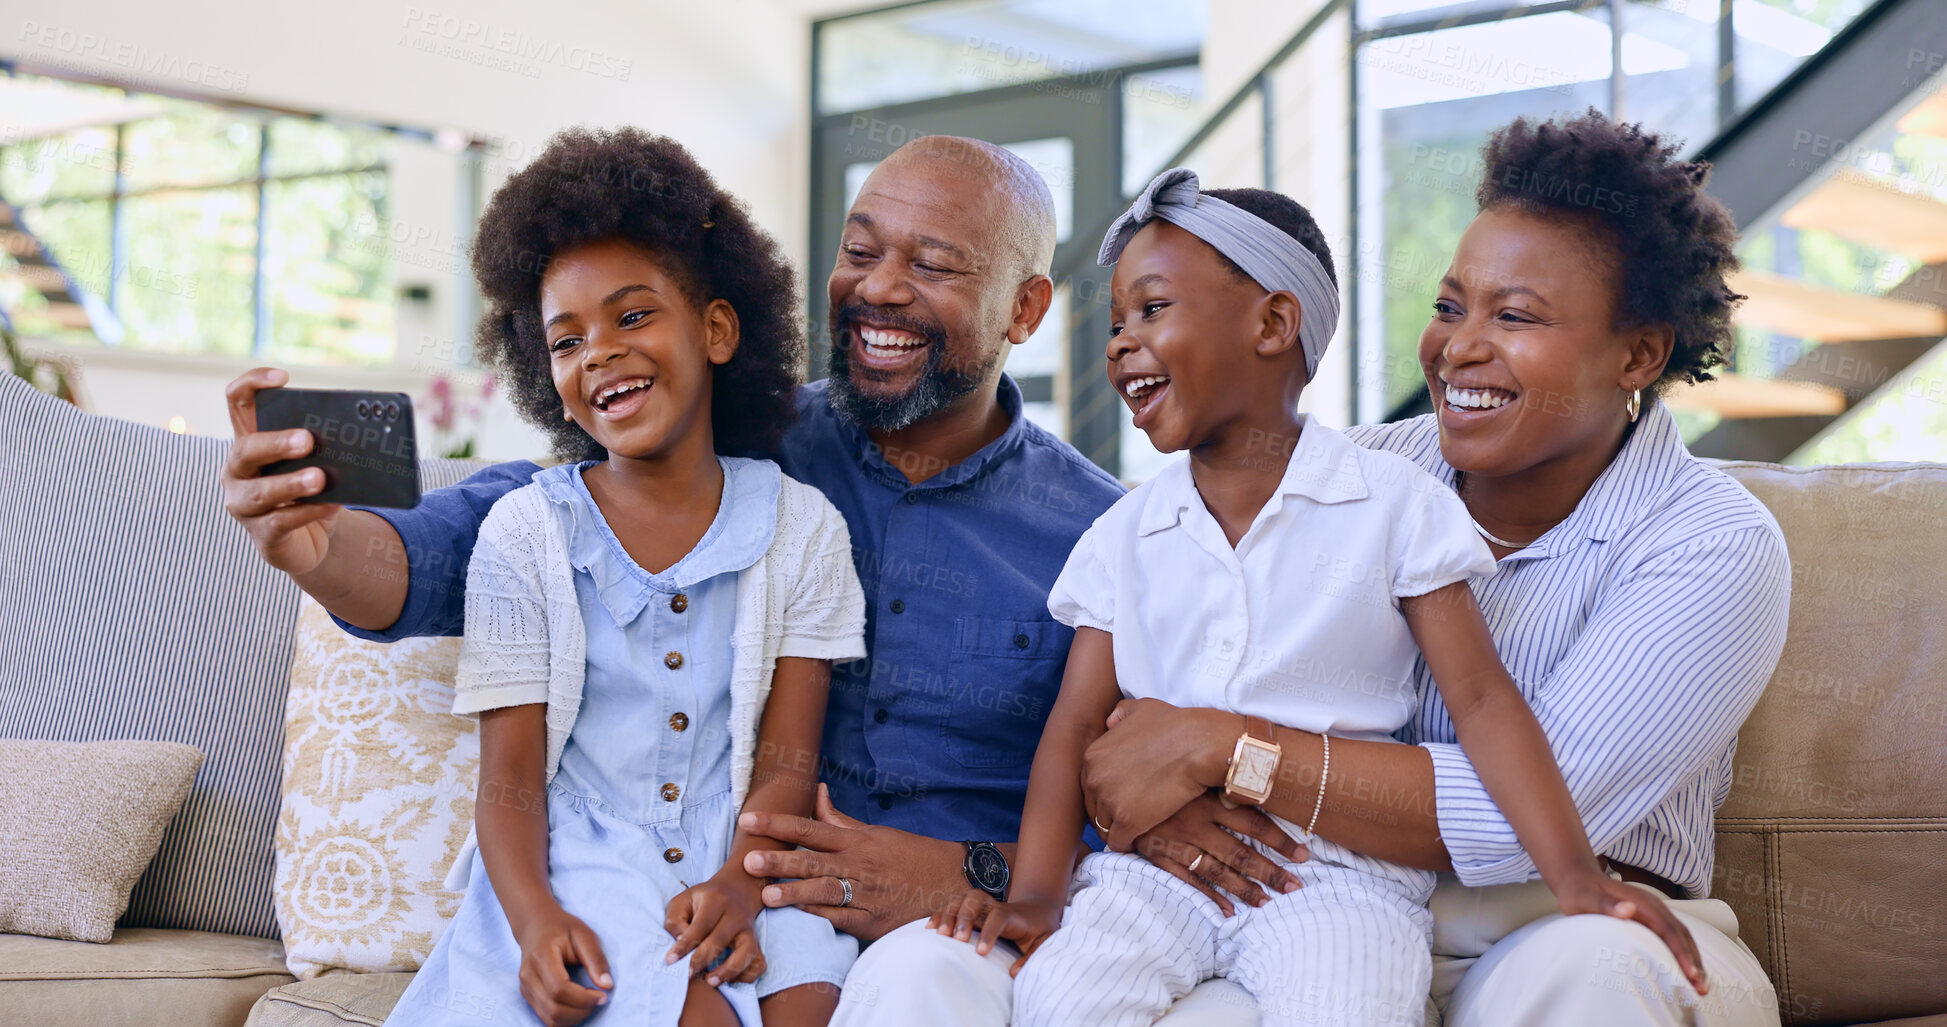 Buy stock photo Selfie, happy family and children with smile in living room profile picture, social media or post. Black man, woman and girl with excitement for childhood memory, bonding and together on sofa in home